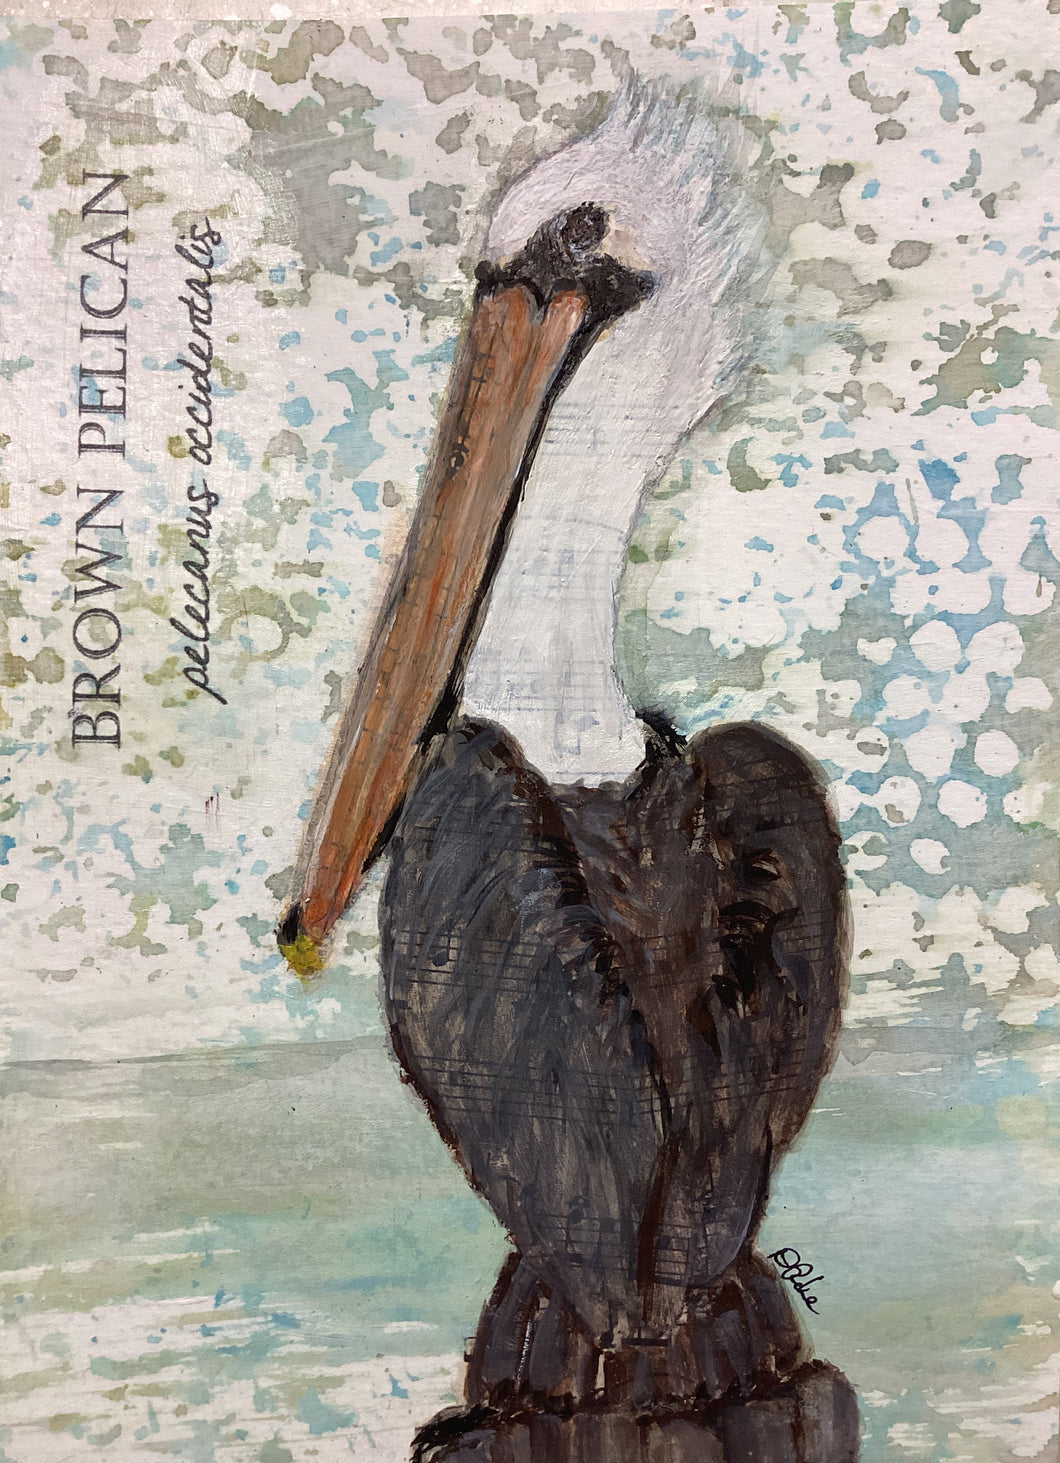 Brown Pelican, 5x7 original mixed media painting, Day 24 of 100